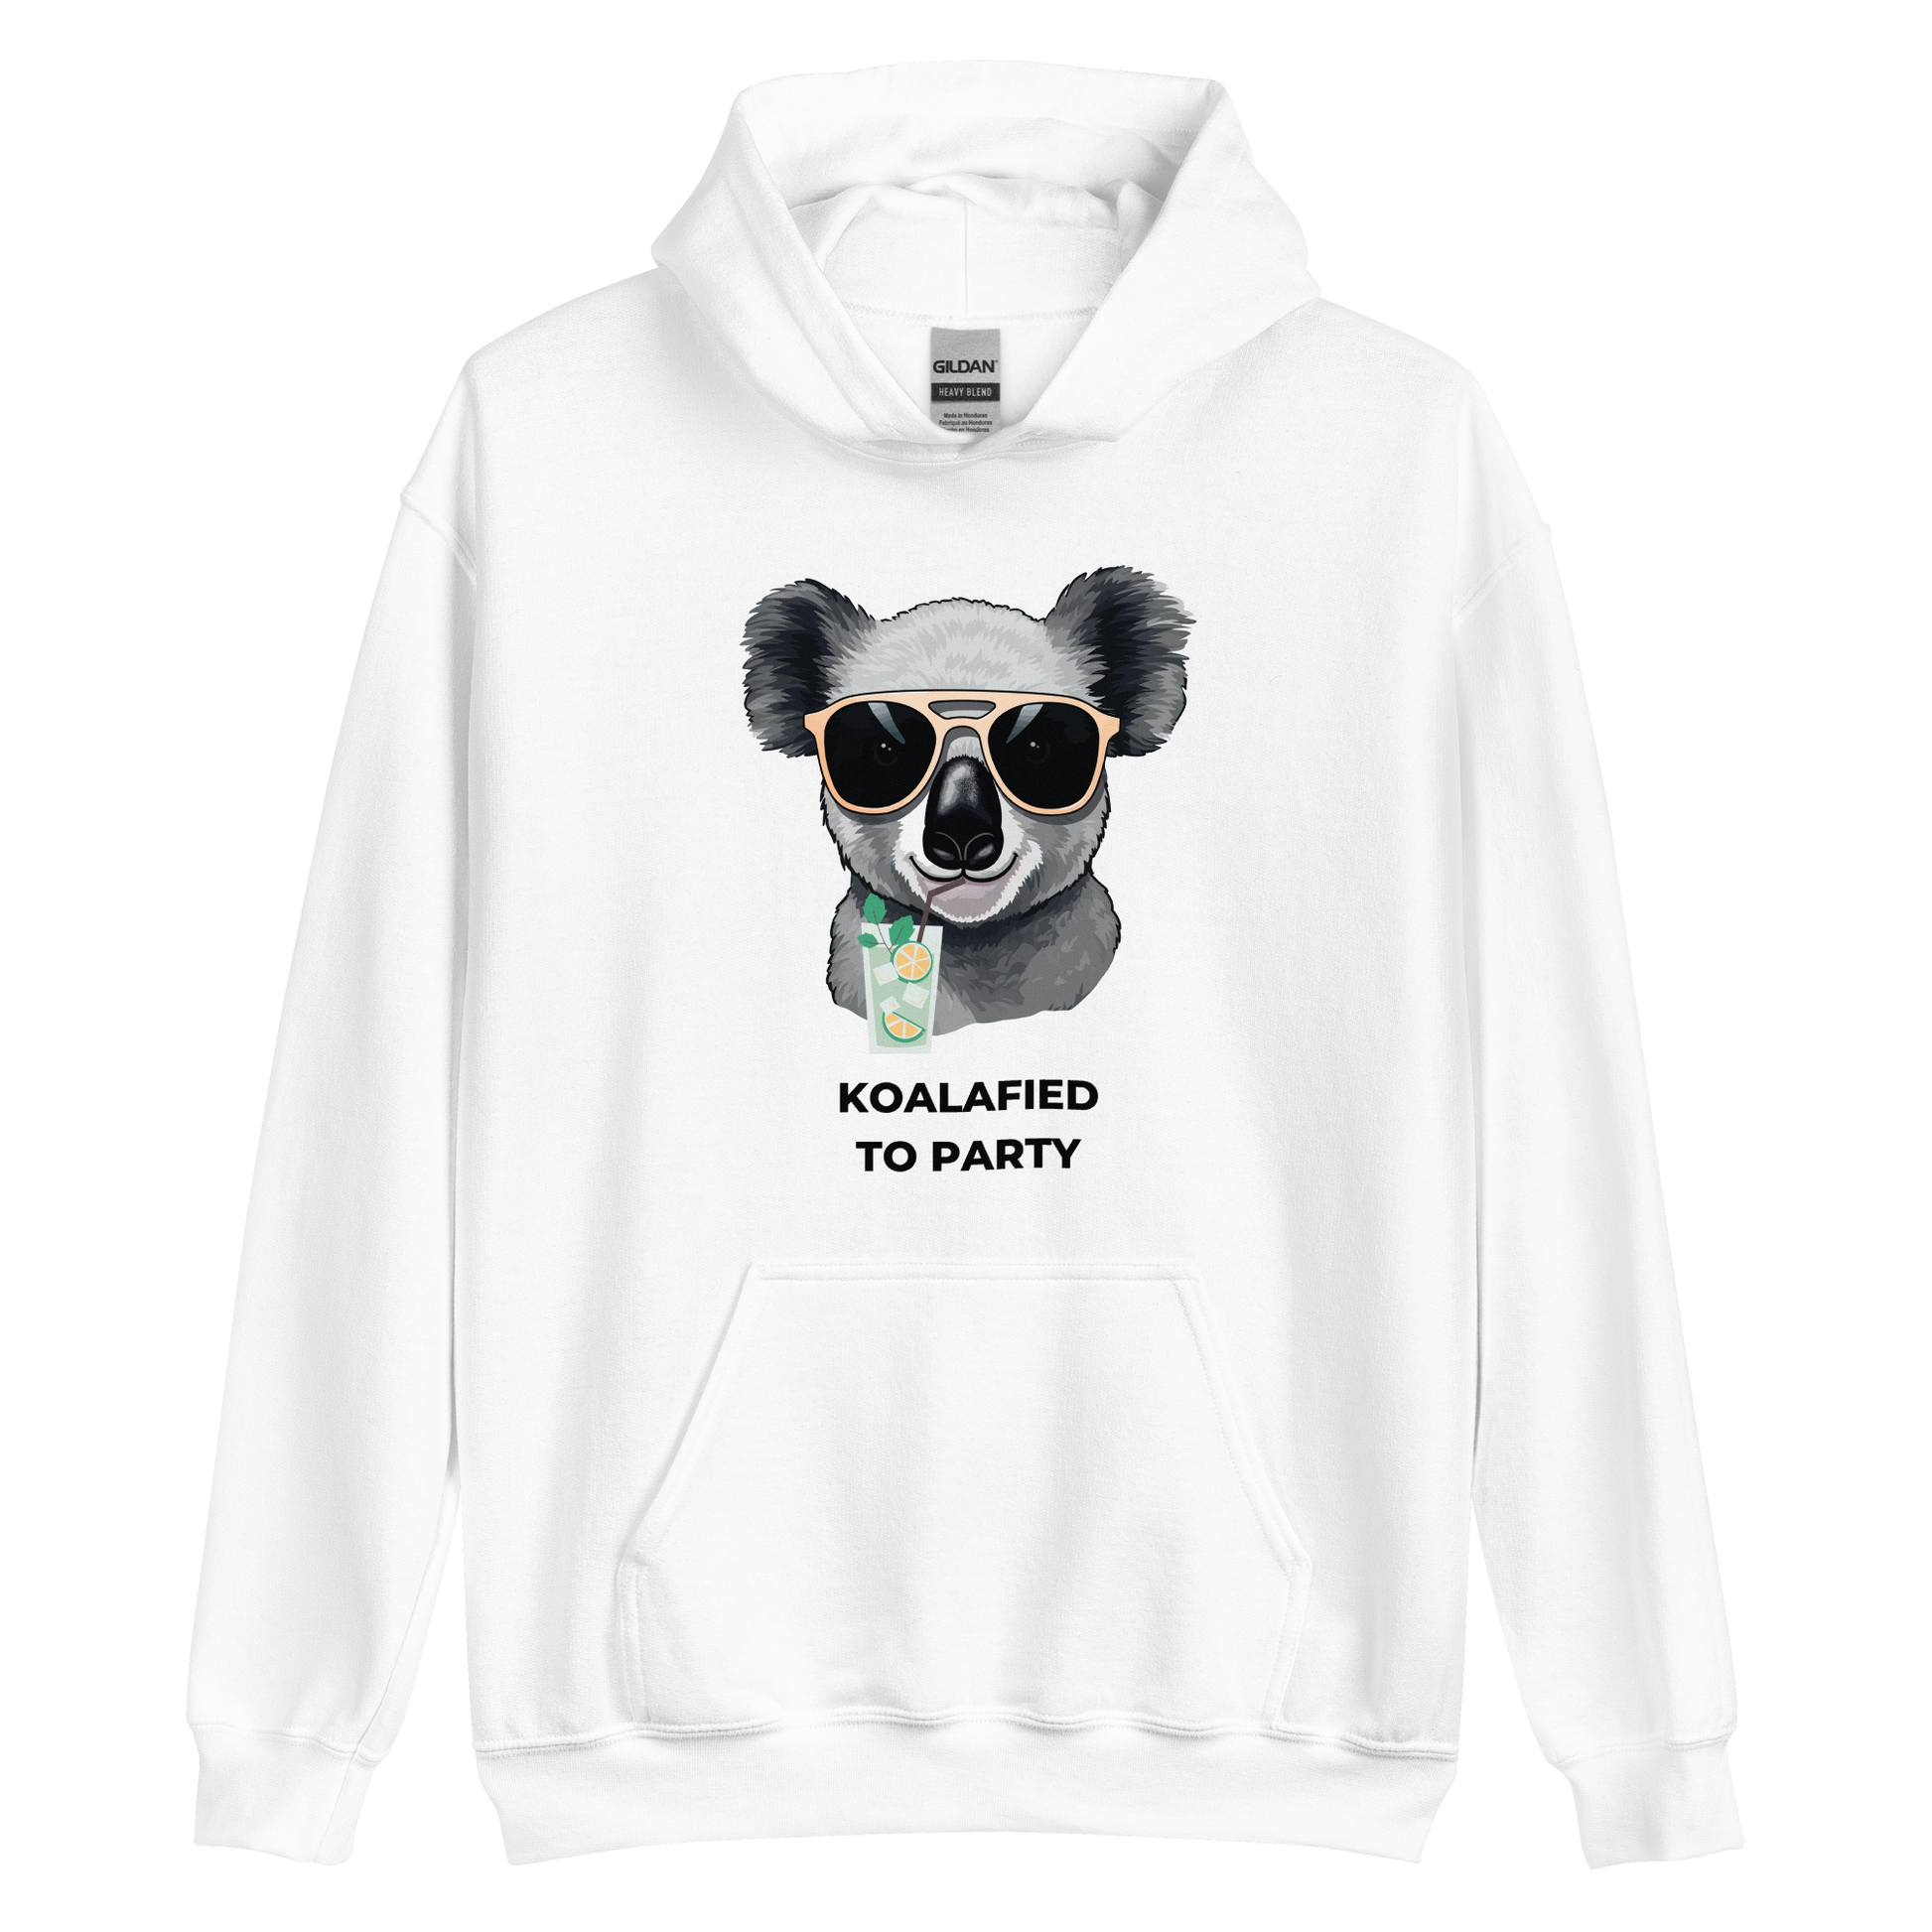 White Koala Hoodie featuring a captivating Koalafied To Party graphic on the chest - Funny Graphic Koala Hoodies - Boozy Fox